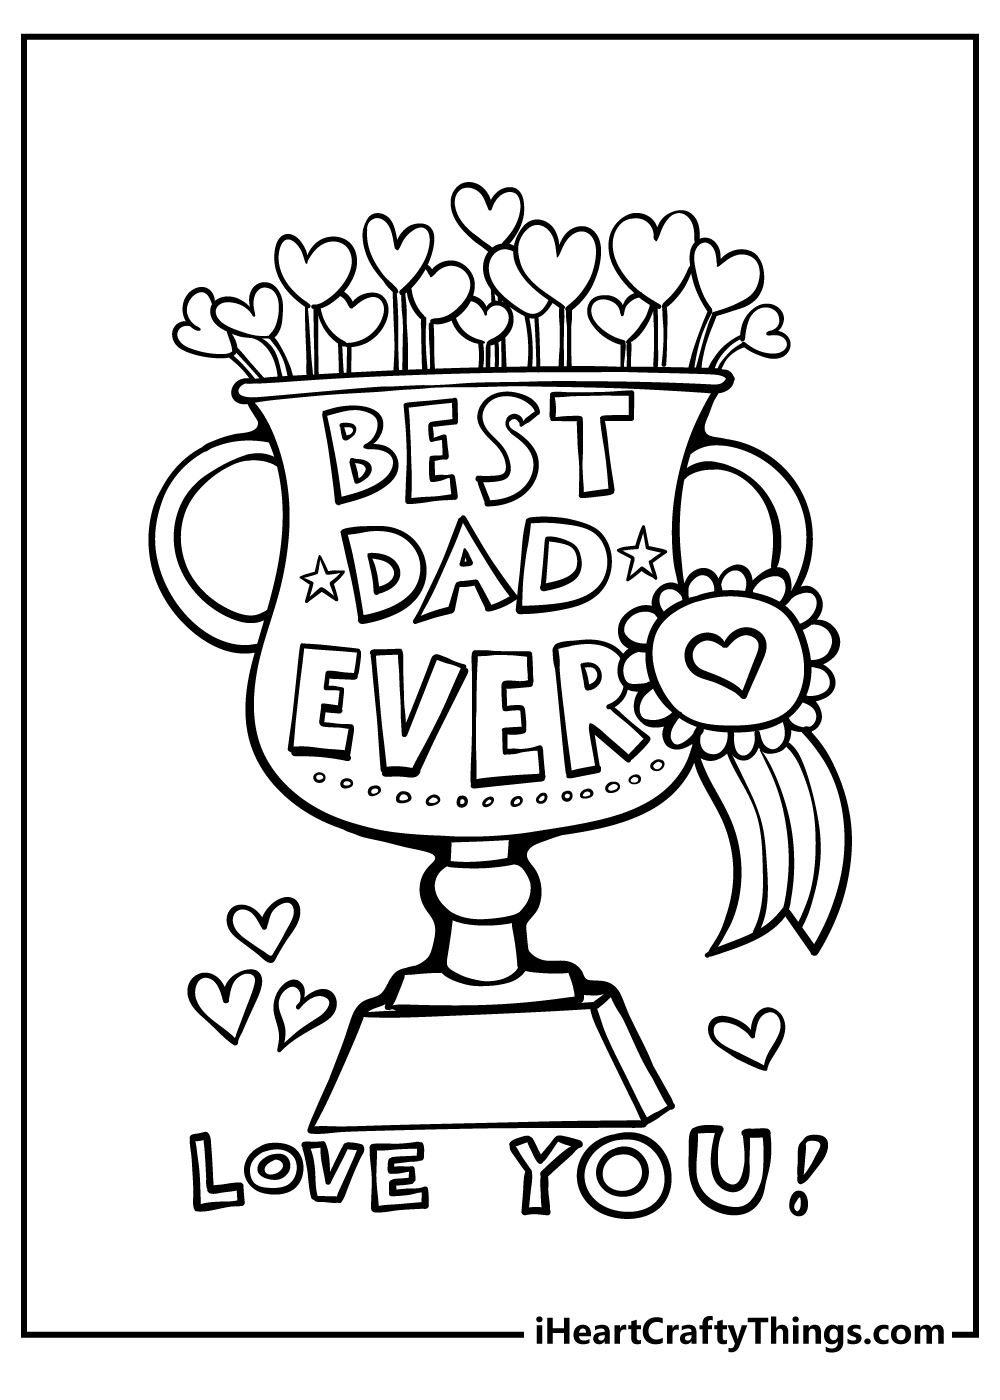 Father’s Day Coloring Pages for adults free printable